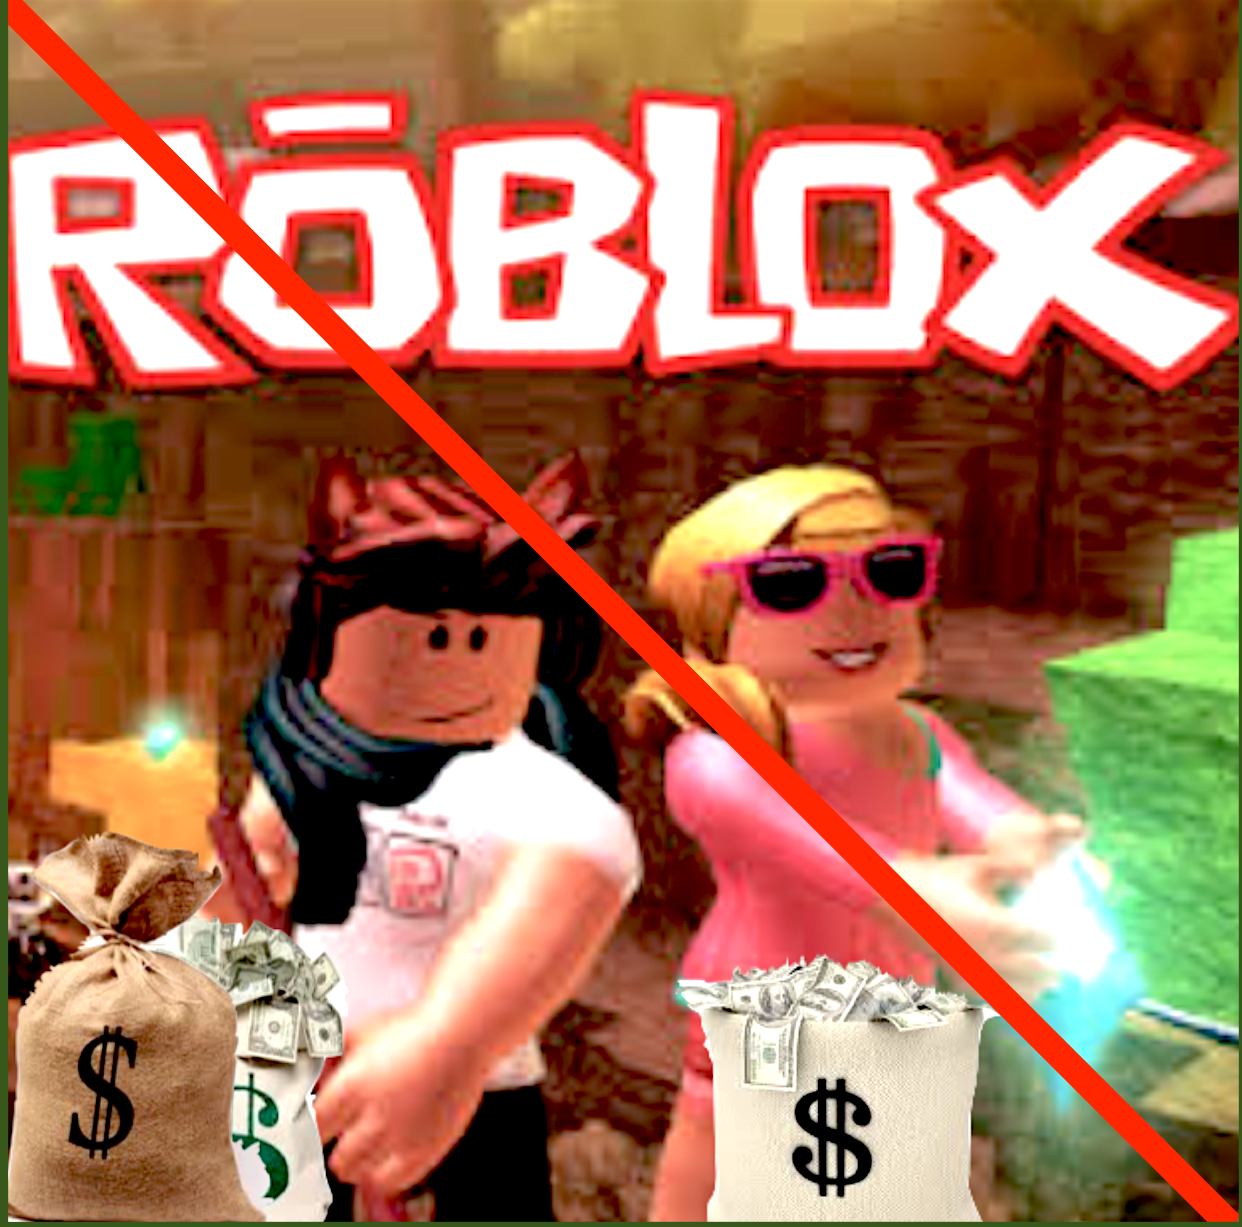 Hey Roblox Leave Them Kids Alone By Danielle Fenton Medium - roblox is dying credit card meme